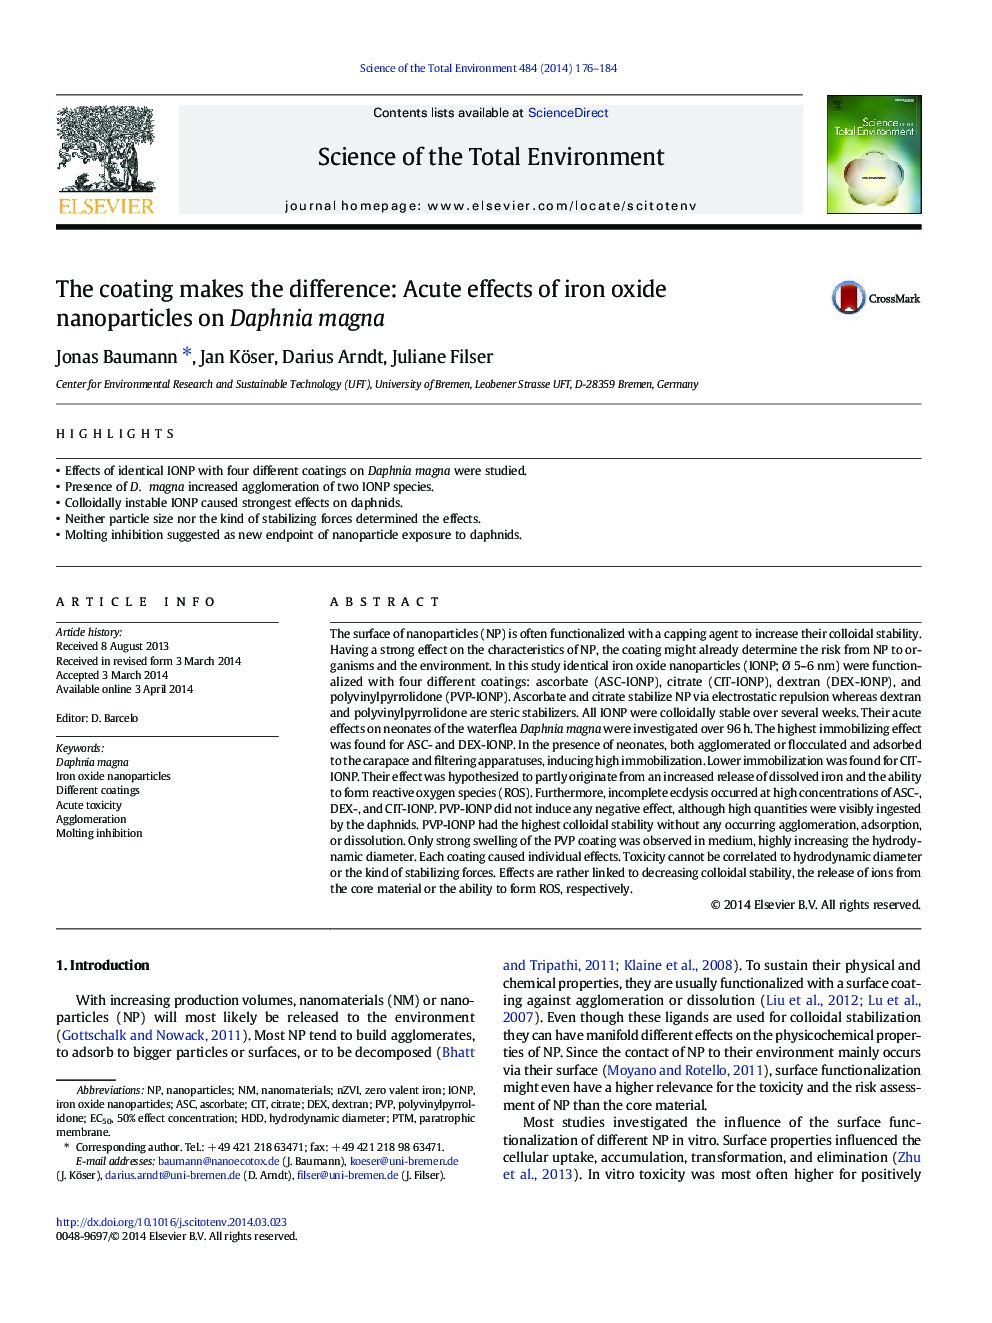 The coating makes the difference: Acute effects of iron oxide nanoparticles on Daphnia magna